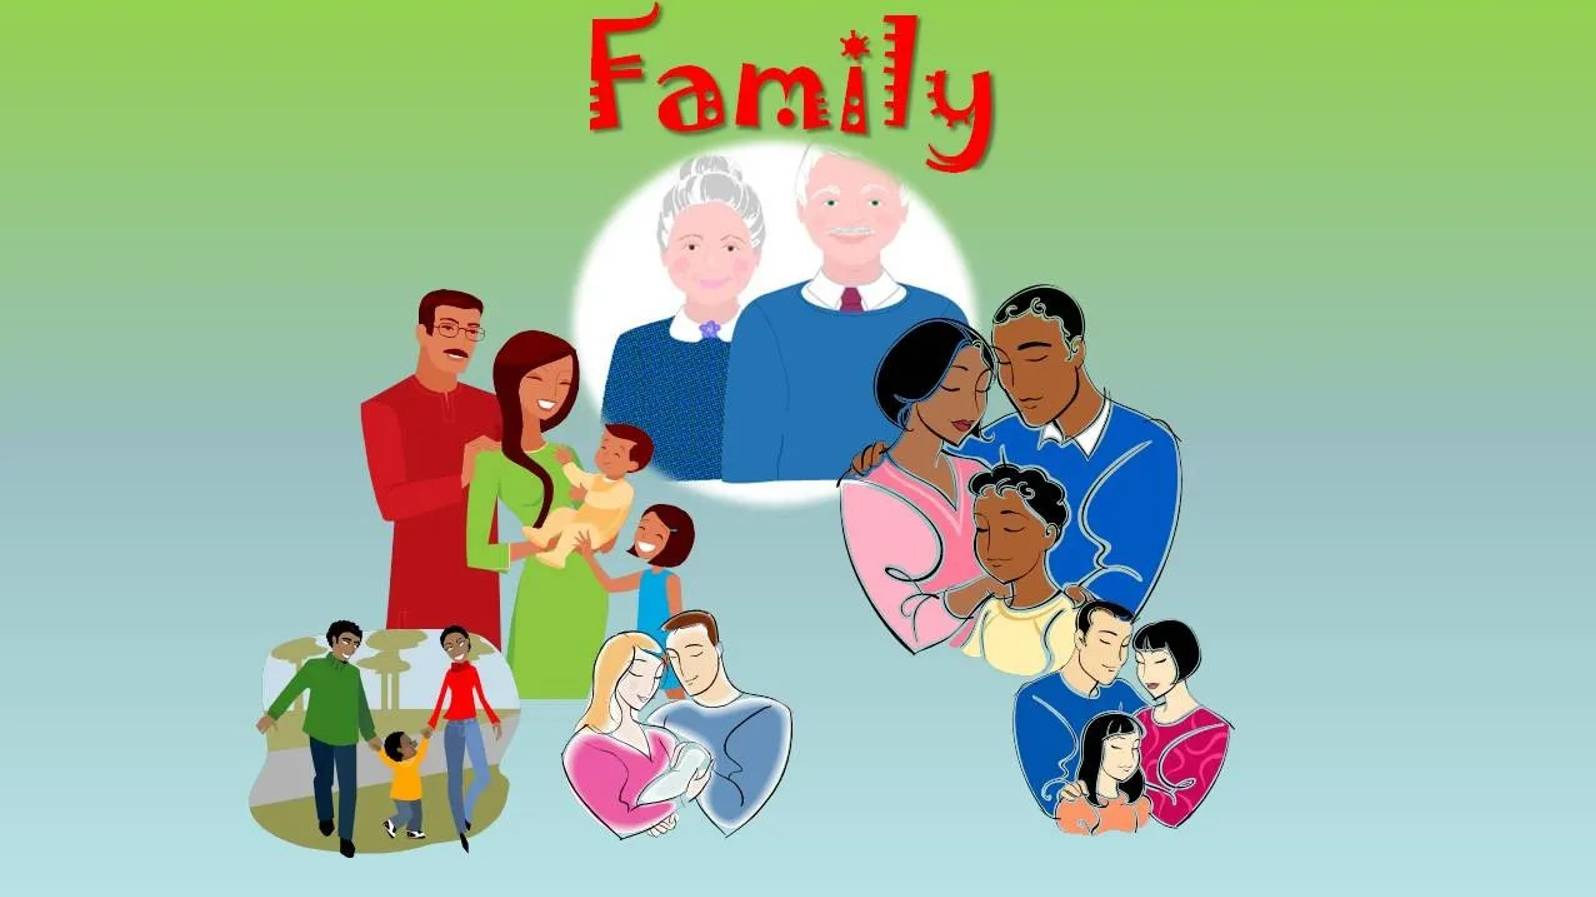 Family -English Vocabulary Lesson _ Family Words in English